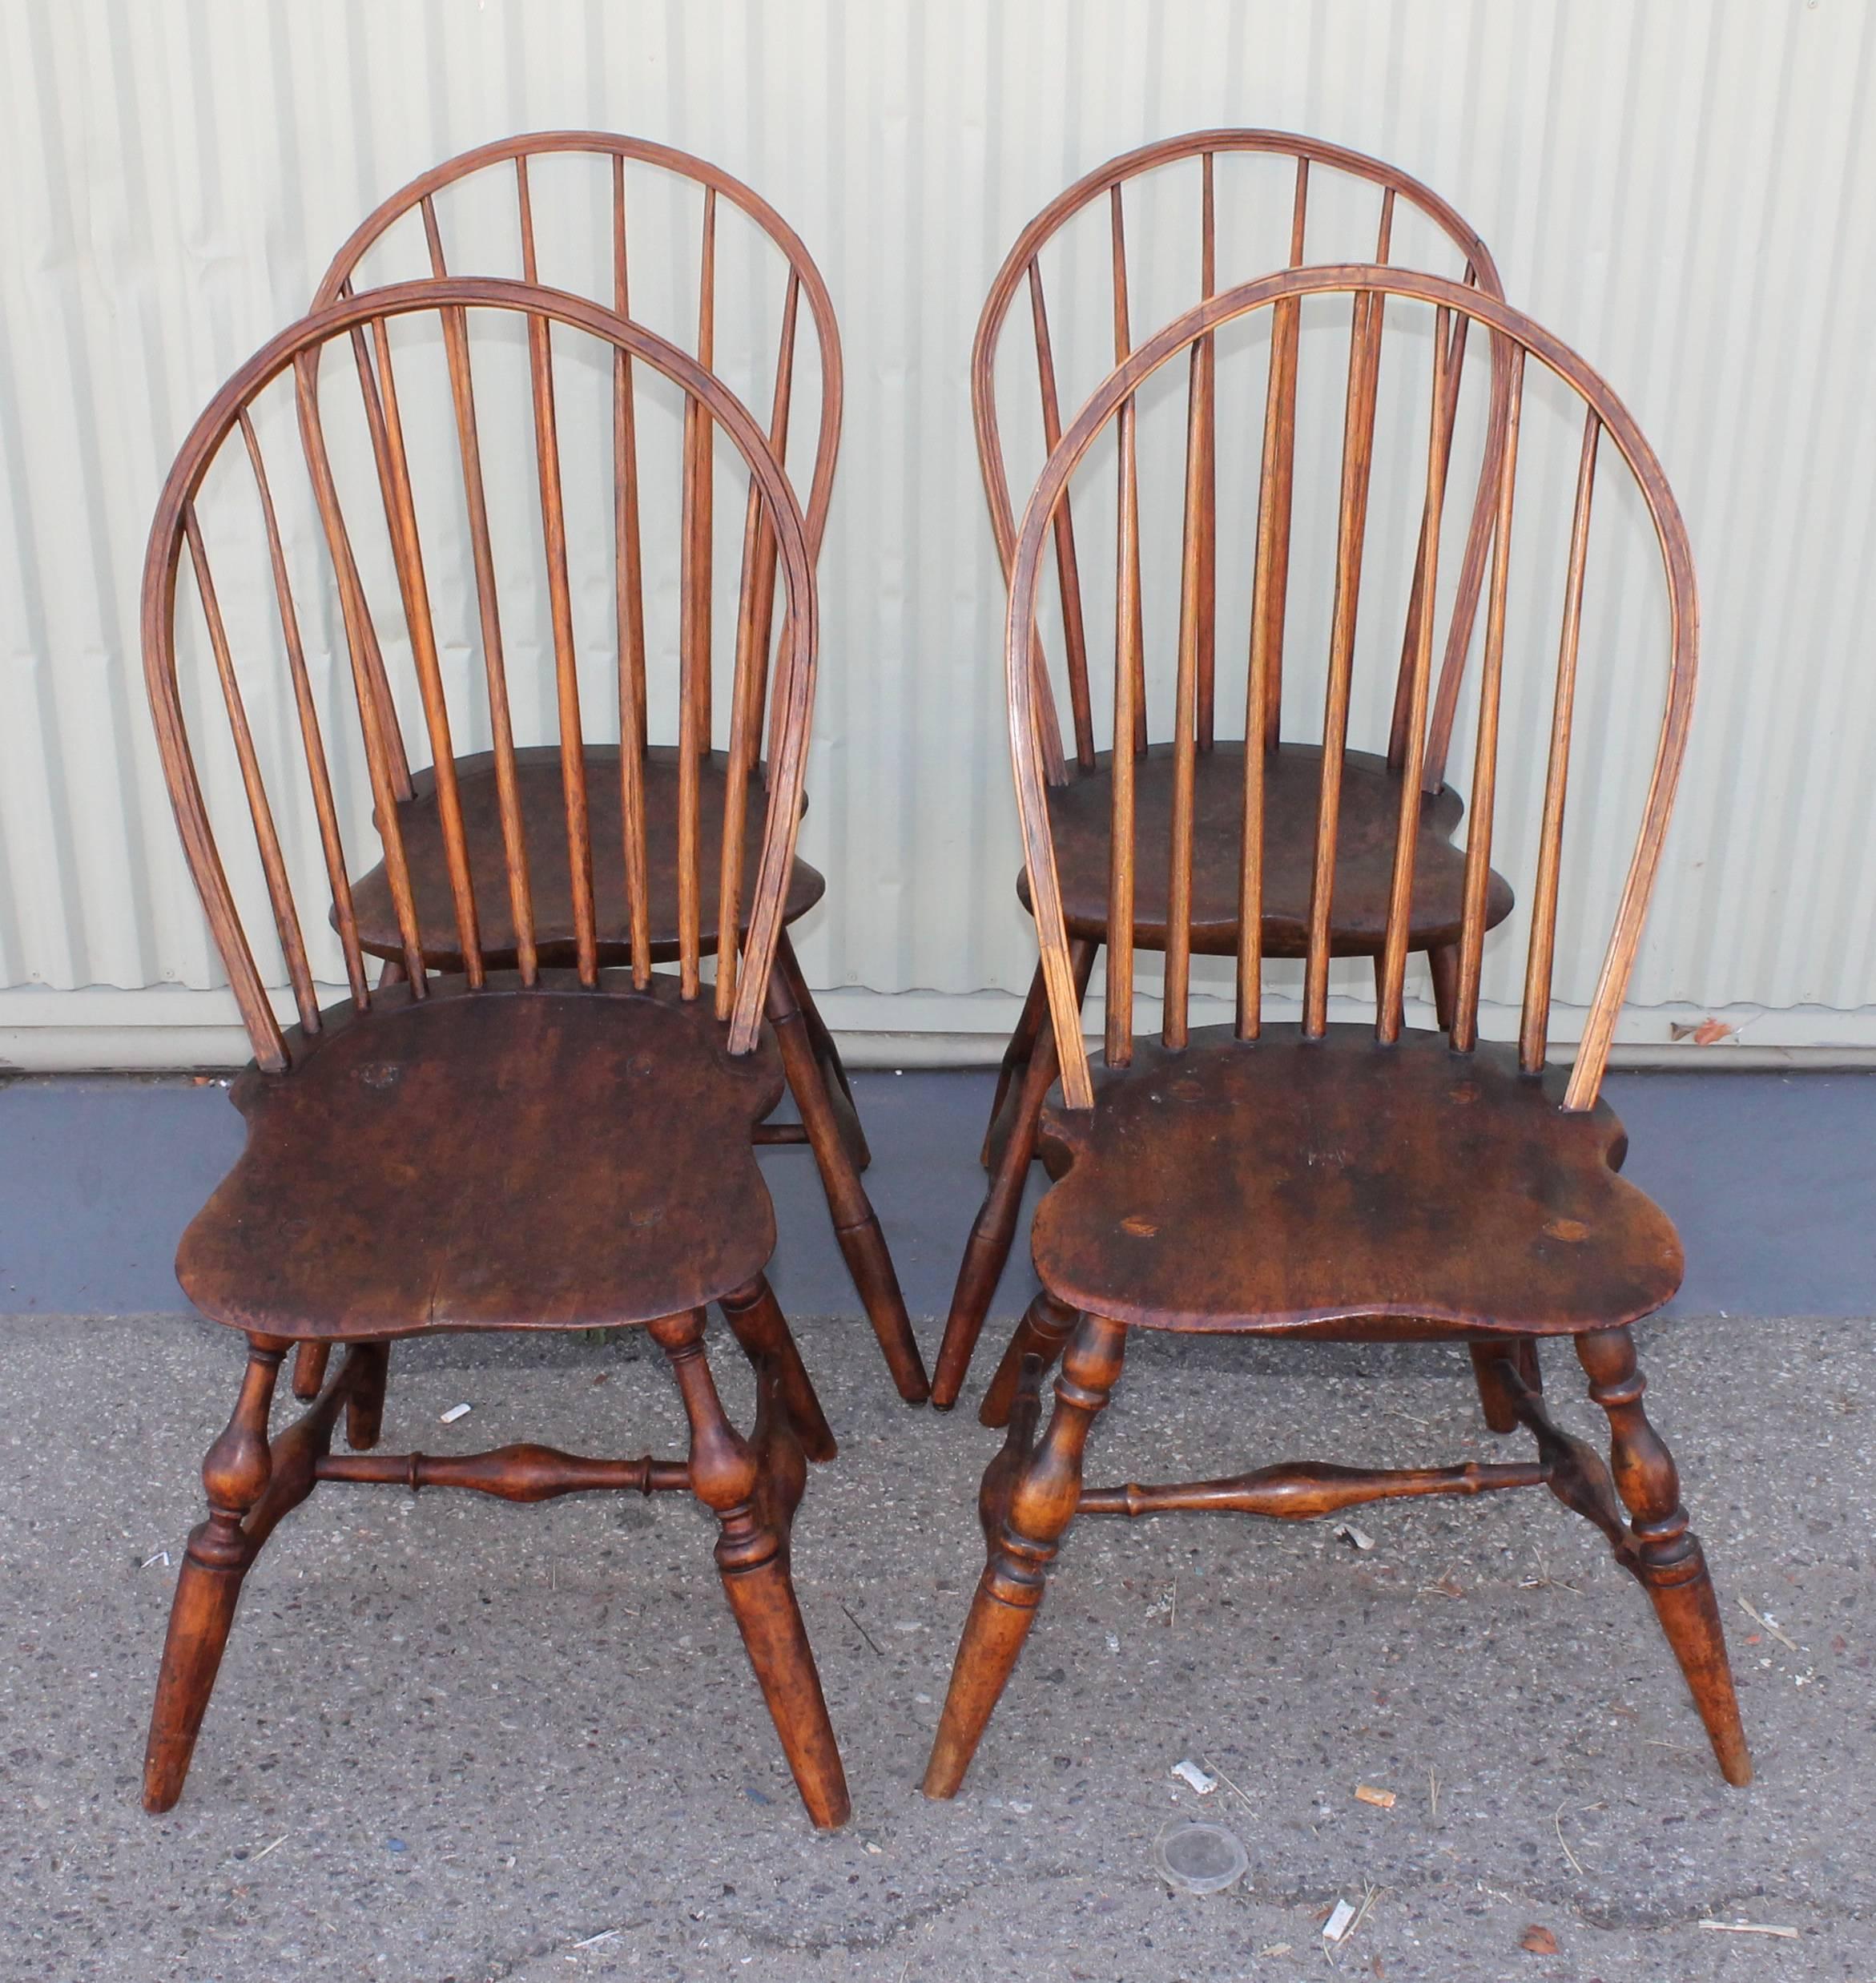 This set of four Windsor chairs are all in great condition and are very similar in design and patina. Two of the chairs have turned legs and two have bamboo turnings. These bow back Windsors are in great as found condition.